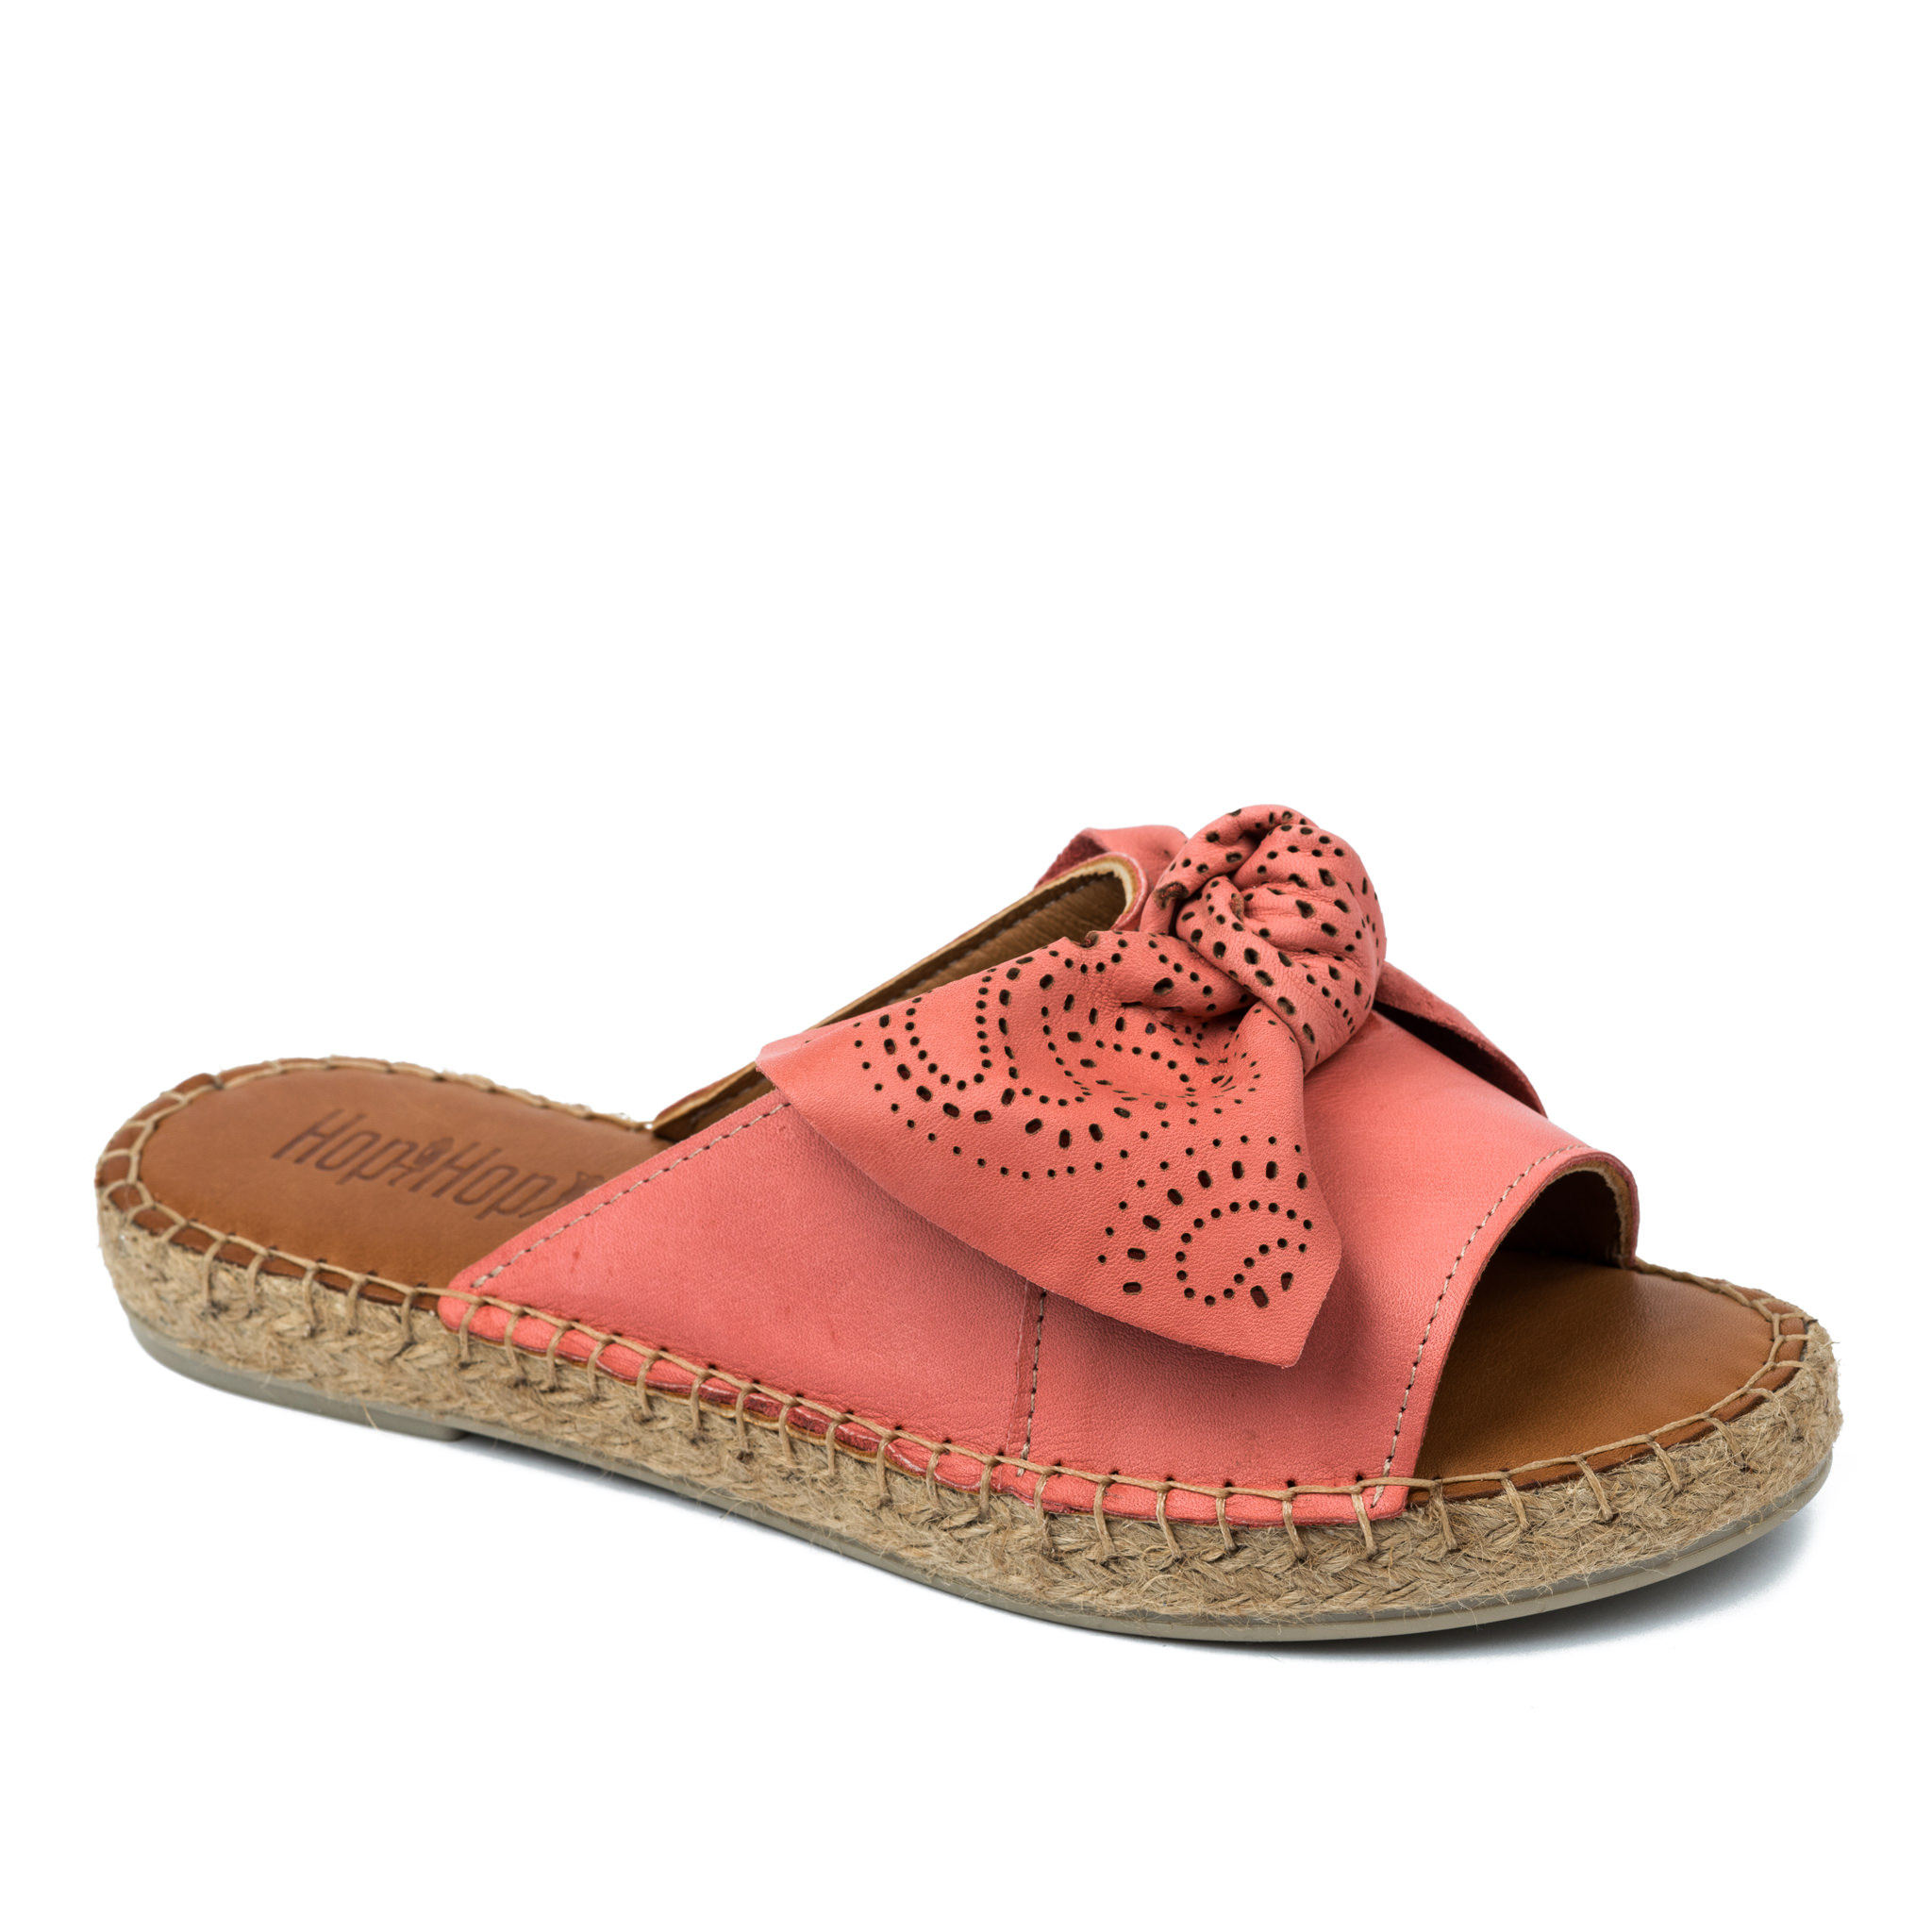 Leather slippers A690 - ROSE